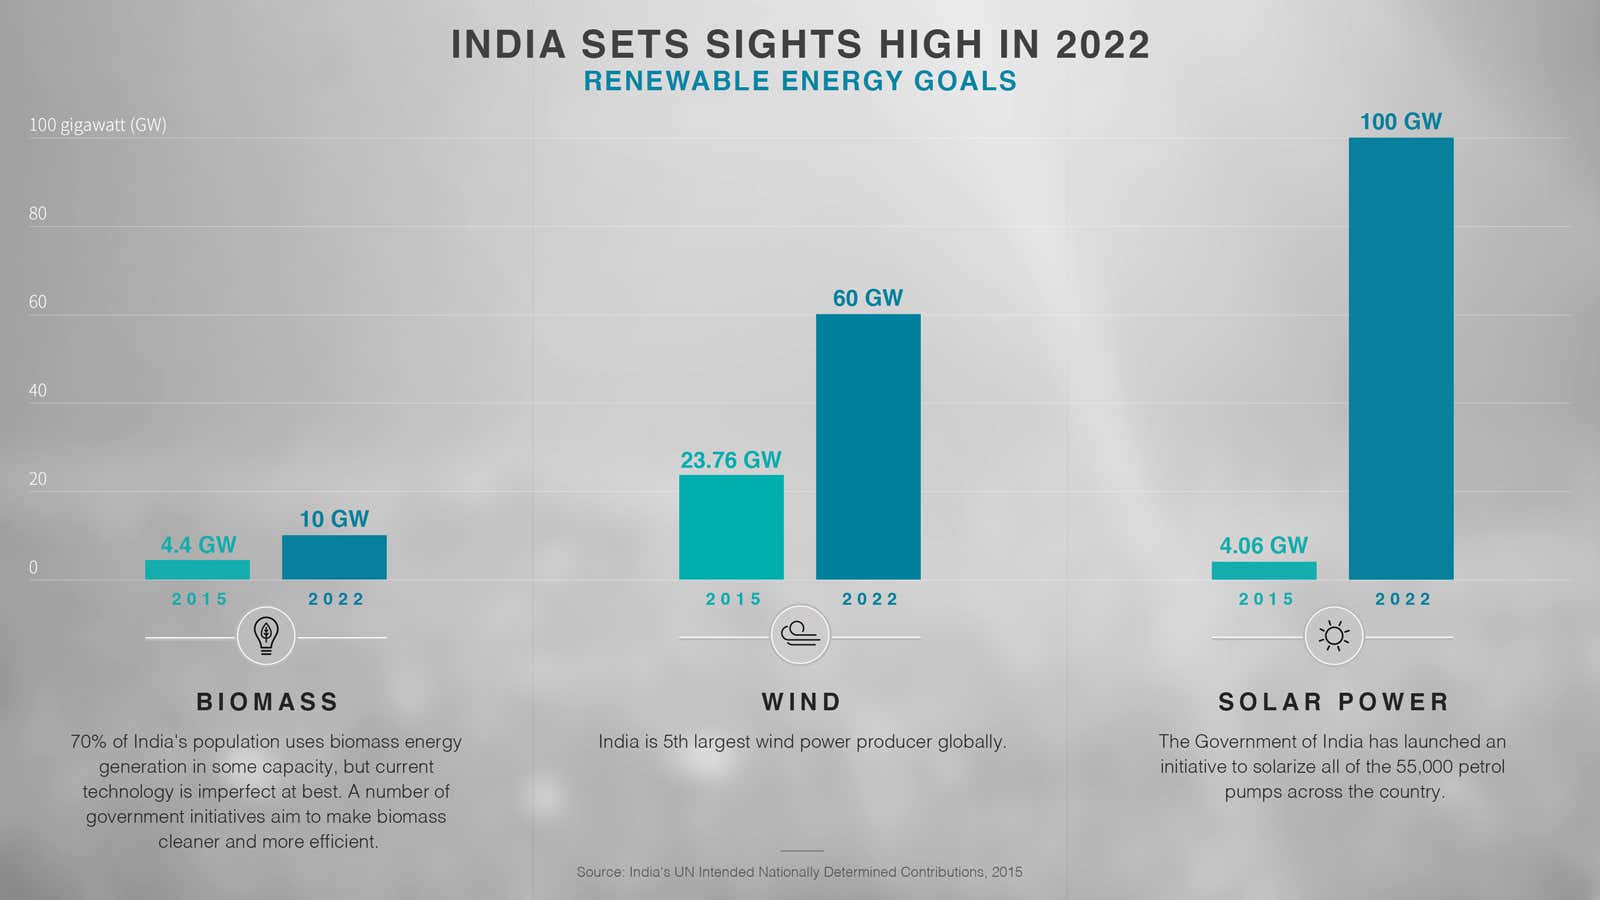 India’s looking to quintuple its solar energy output over the next decade